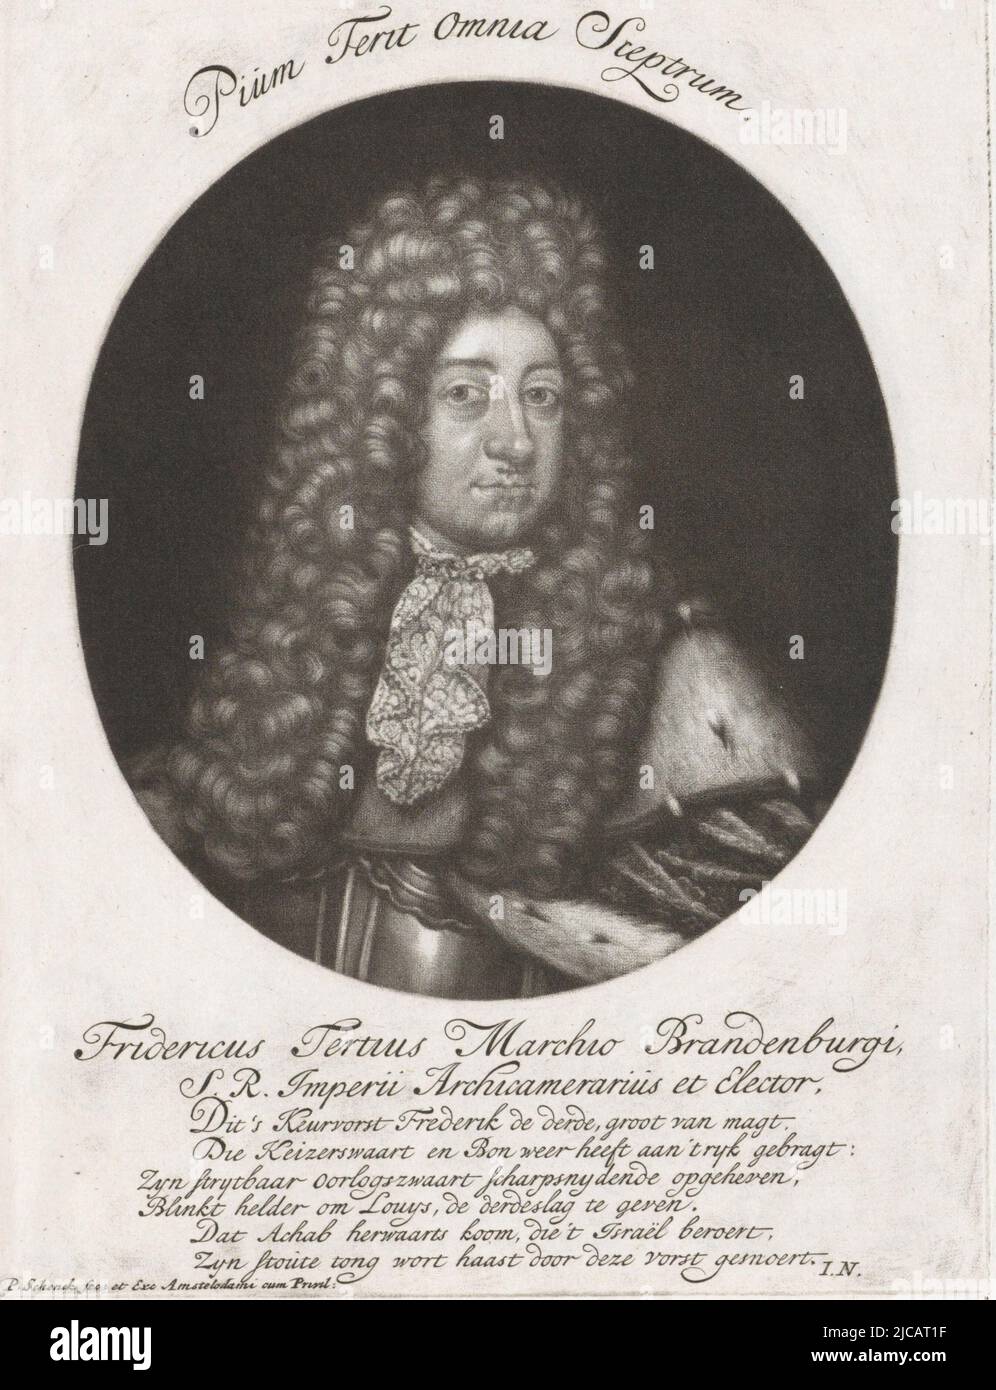 Frederick I, king in Prussia and as Frederick III, elector of Brandenburg He was Elector of Brandenburg from 1688 to 1701 and, until his death, Frederick I King of Prussia, Portrait of Frederick I of Prussia Portraits of royalty and their coats of arms  Leopoldo I Magno SRI Imperatori Semper Augusto  on object, print maker: Pieter Schenk (I), (mentioned on object), Jan Norel, (mentioned on object), publisher: Pieter Schenk (I), (mentioned on object), Amsterdam, 1690 - 1713, paper, engraving, h 187 mm × w 141 mm Stock Photo